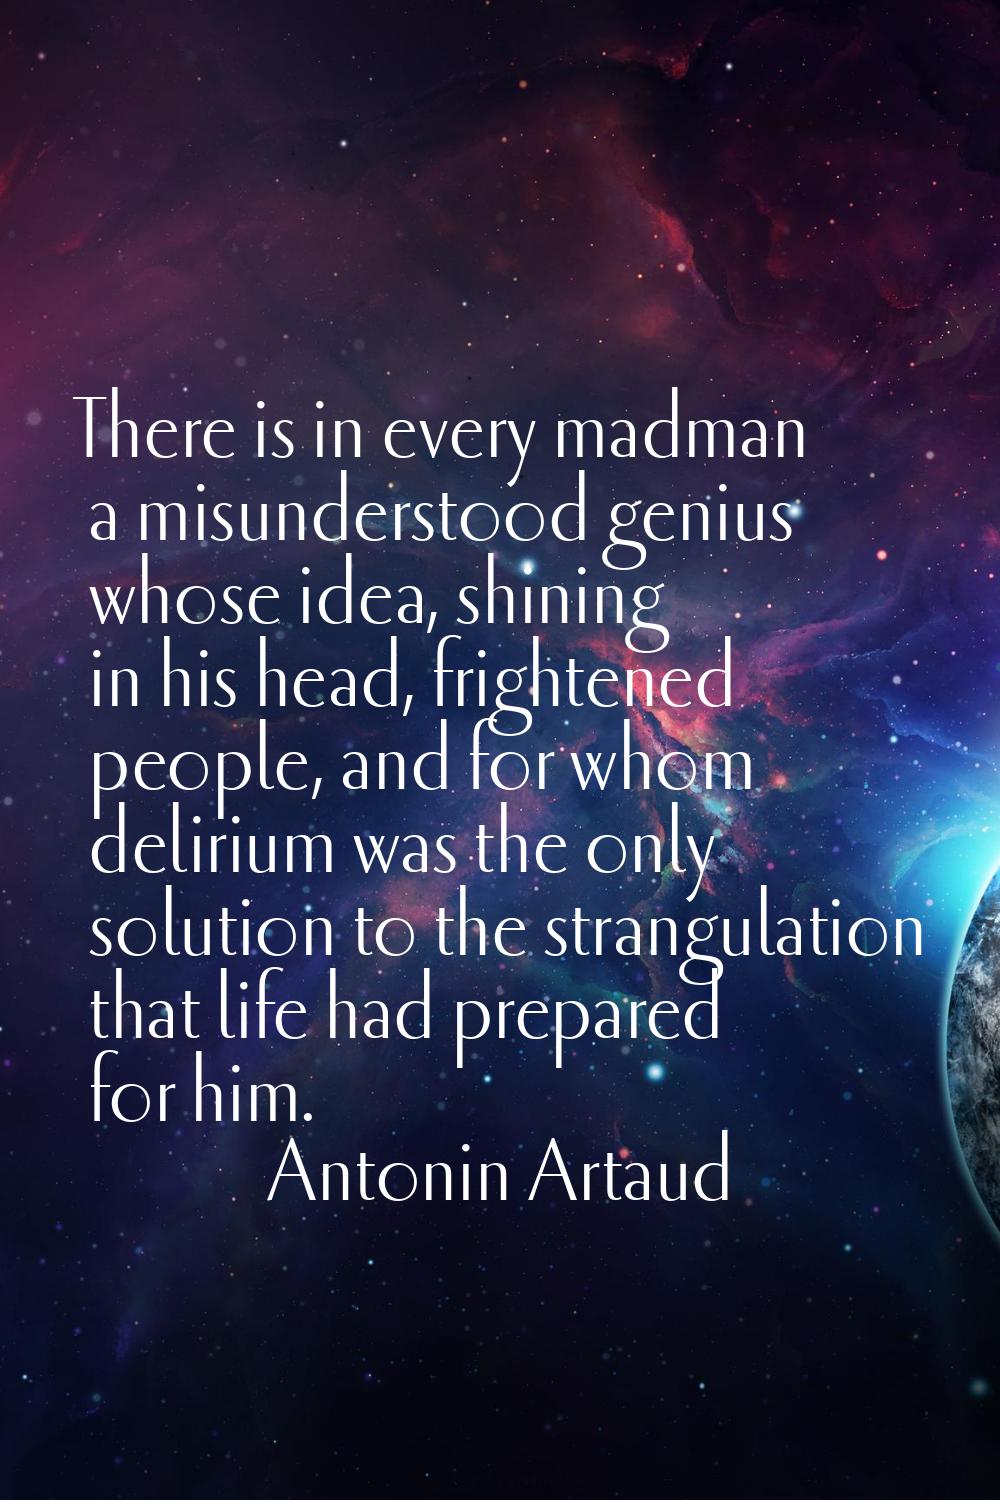 There is in every madman a misunderstood genius whose idea, shining in his head, frightened people,